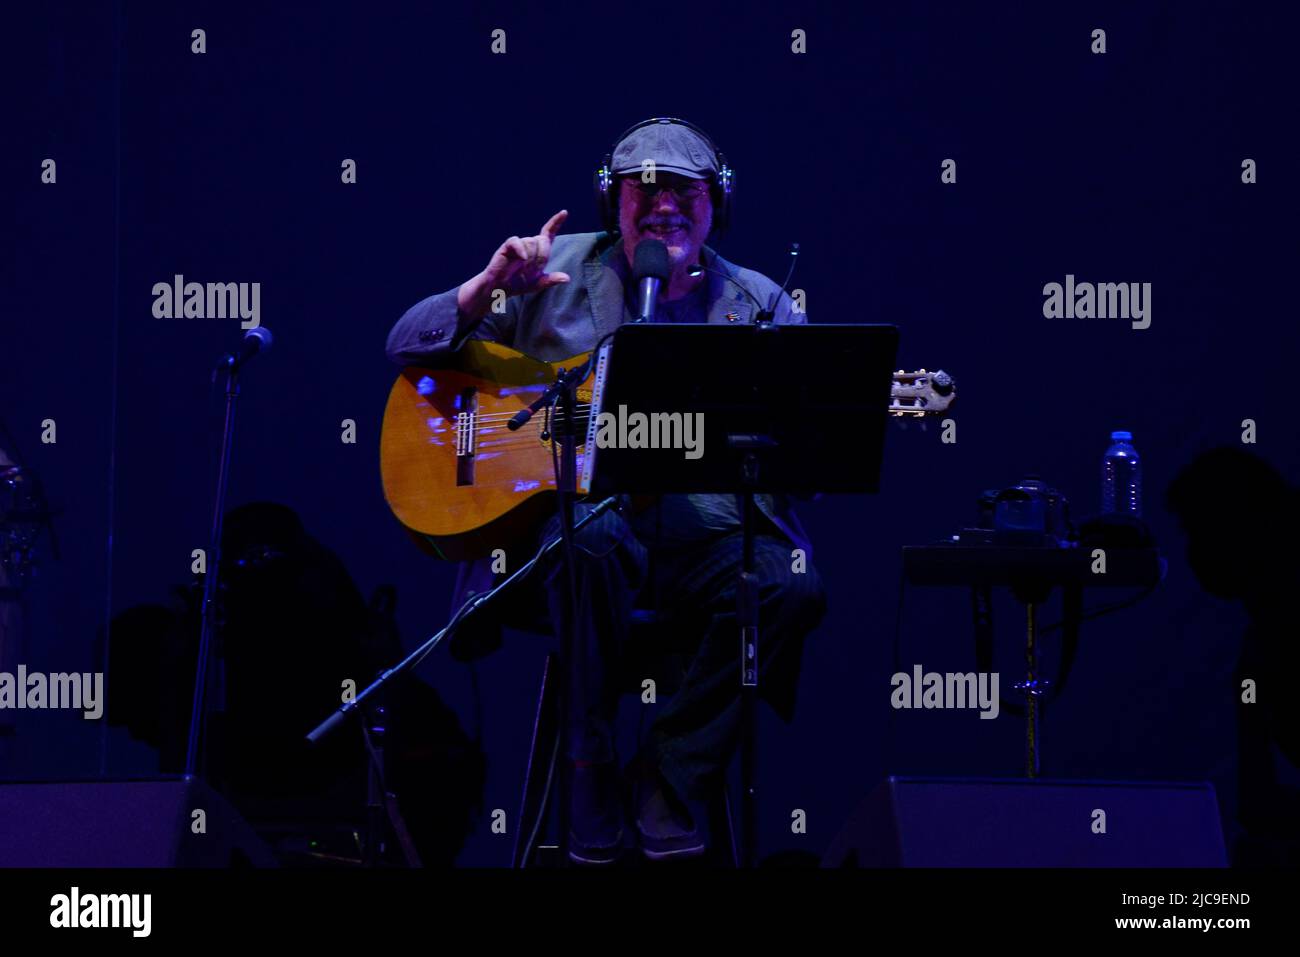 Non Exclusive: June 10, 2022, Mexico City, Mexico: Cuban trova singer-songwriter Silvio Rodríguez sings on stage during a free concert at Mexico City Stock Photo